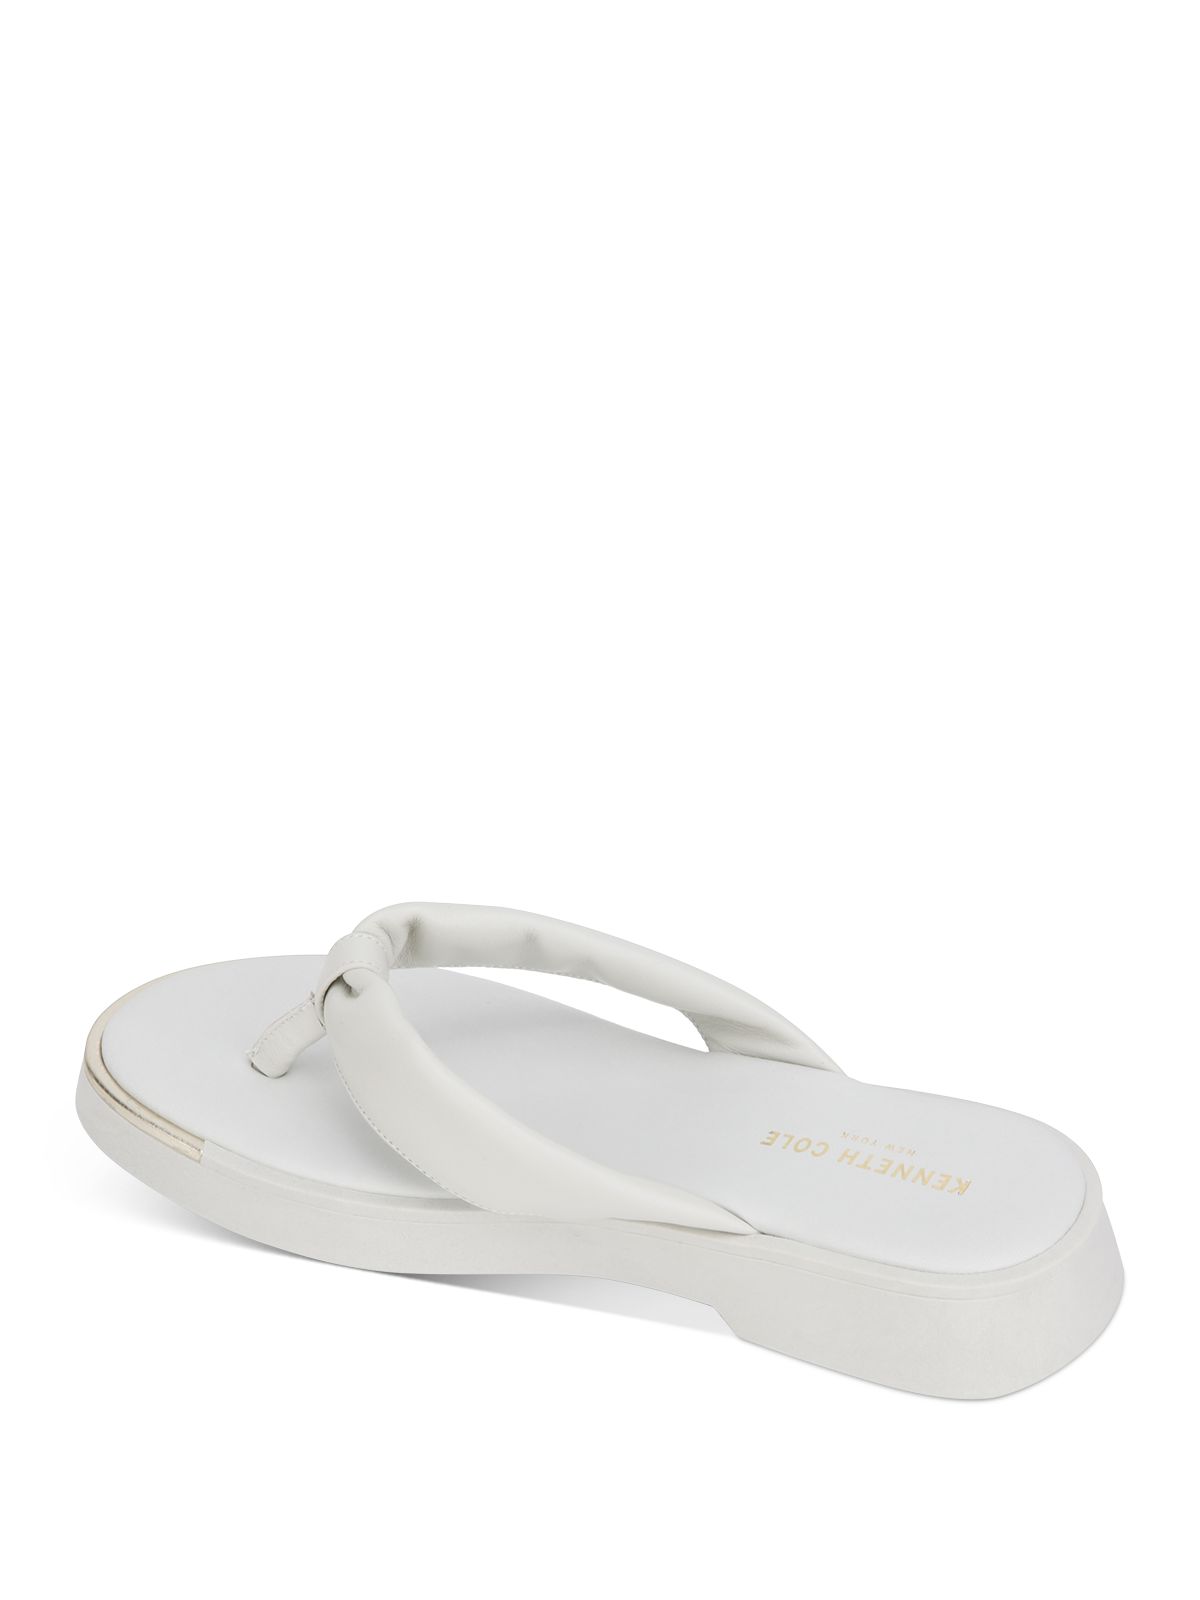 KENNETH COLE Womens White Flatform Gold-Toe Rand On Toe Pu Cushioned Comfort Athens Slip On Leather Thong Sandals Shoes 6.5